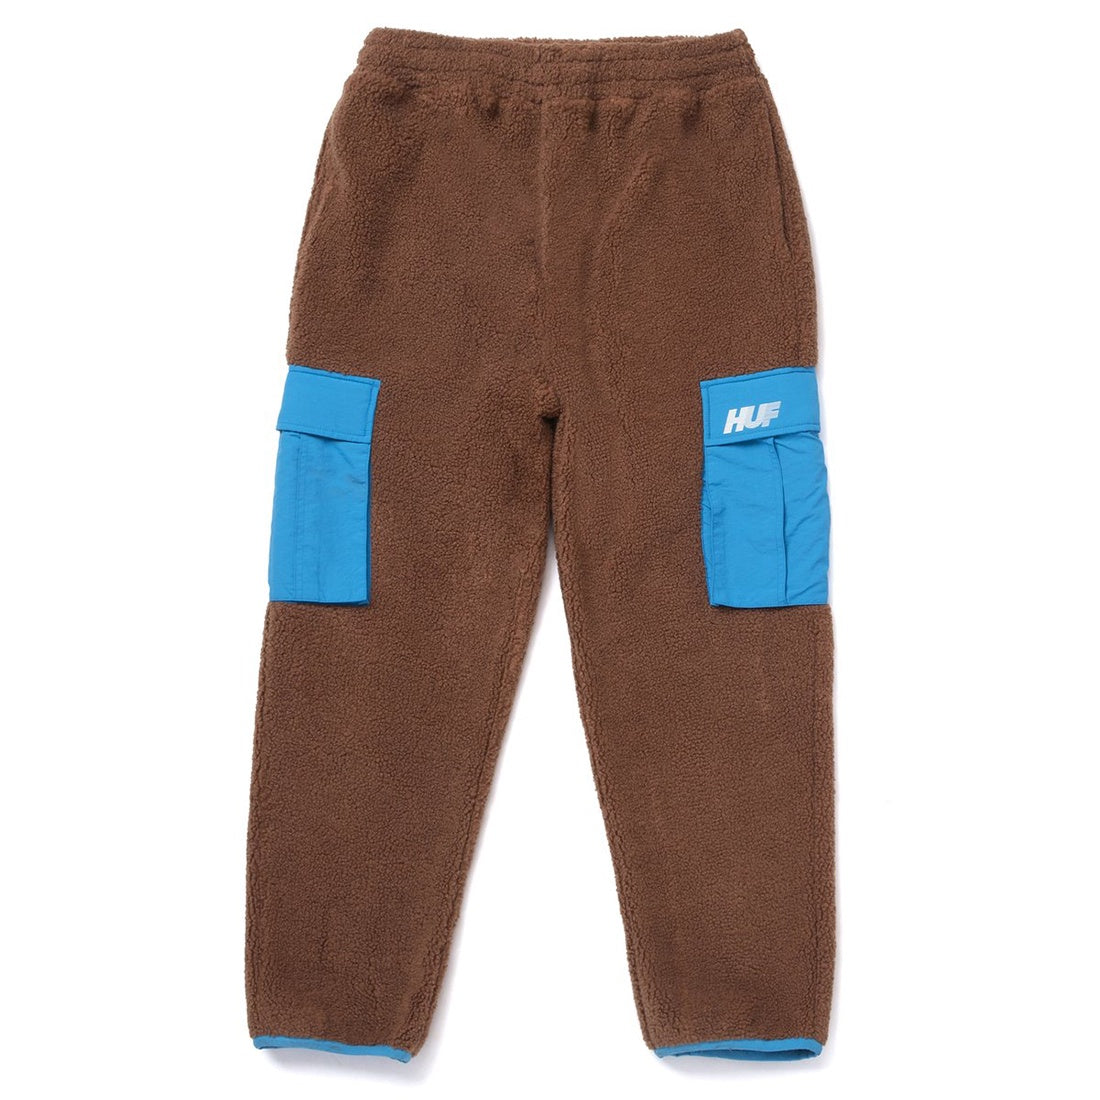 Fort Point Sherpa Pant DBR